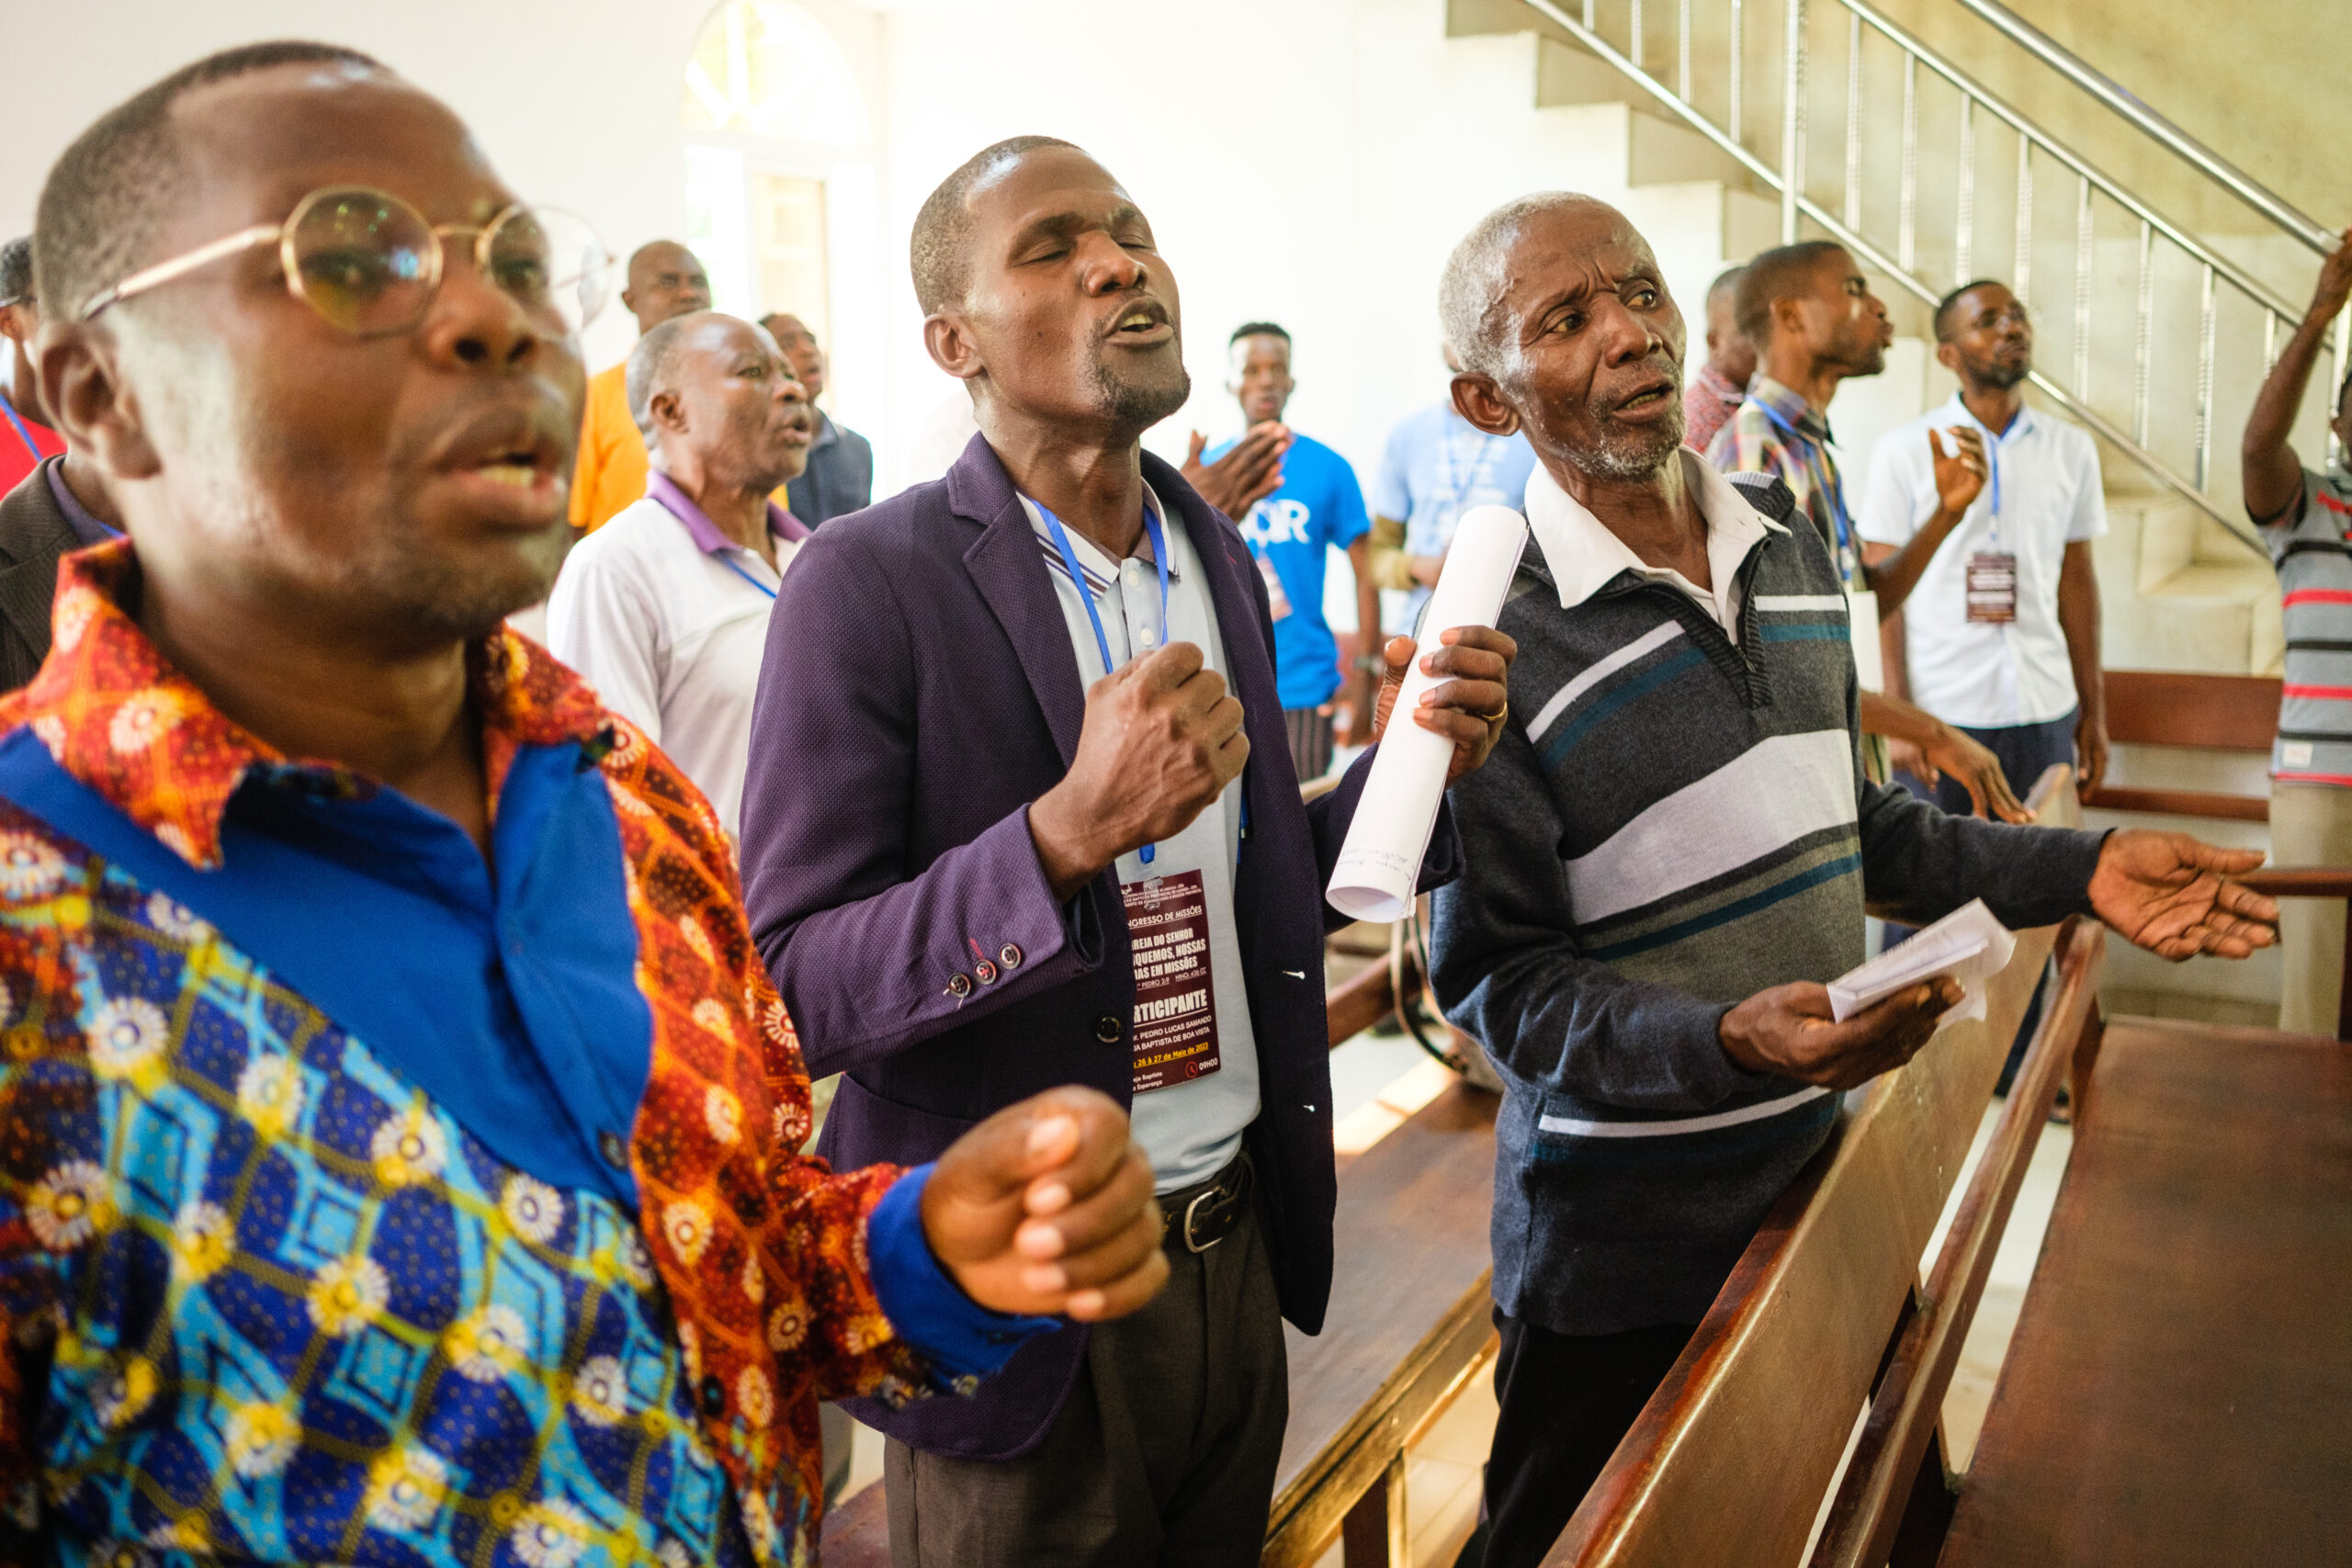 Angolan pastors and missionaries sing praise songs during a missions conference put on by the Angola Baptist Convention in Luanda.